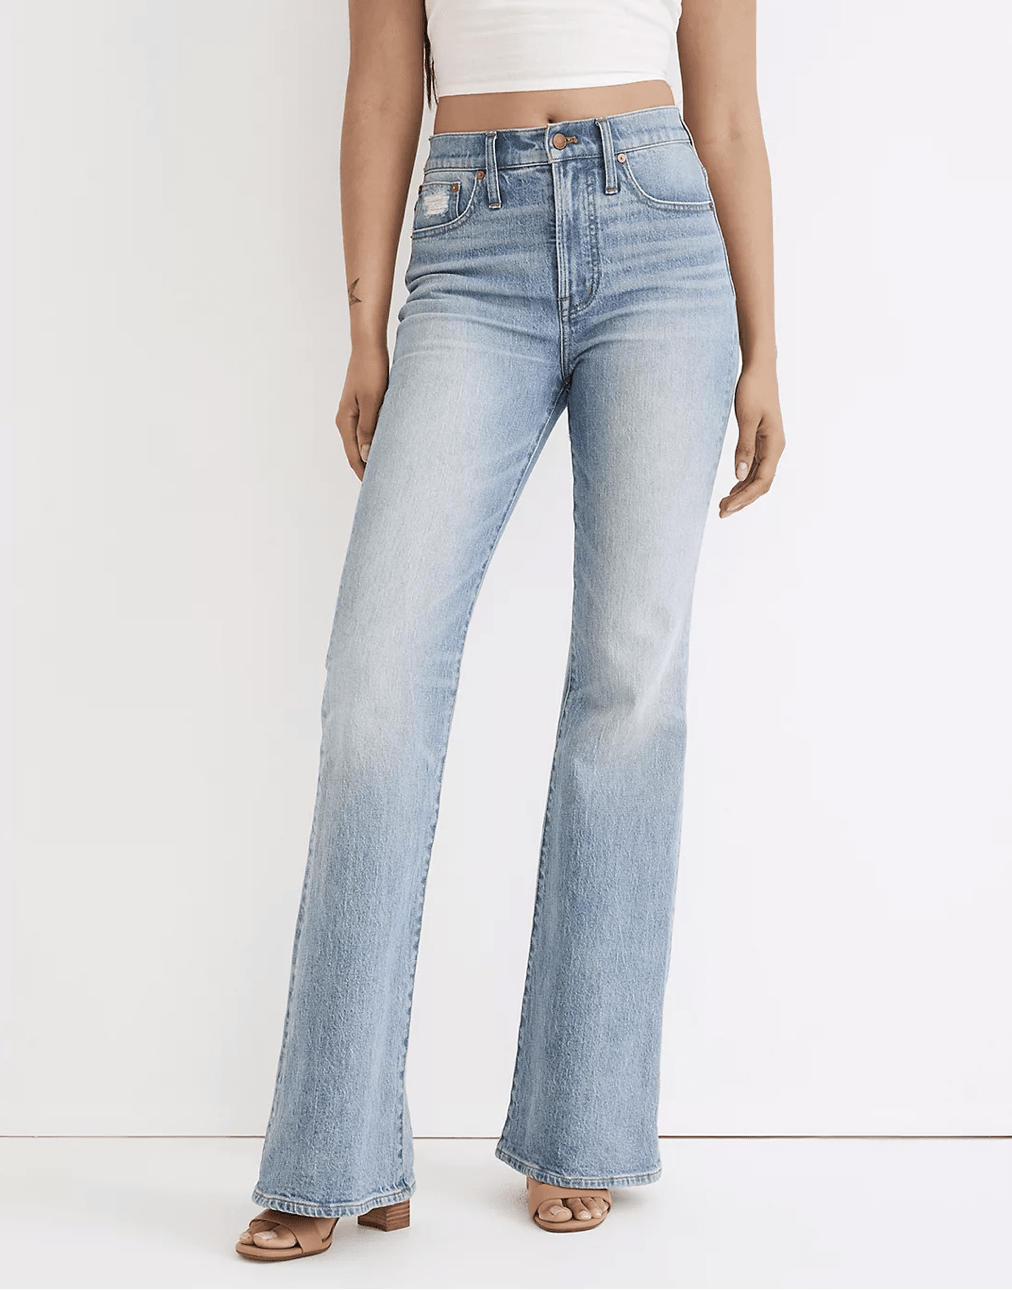 9 flare jeans to add to your wardrobe in 2023 - TODAY